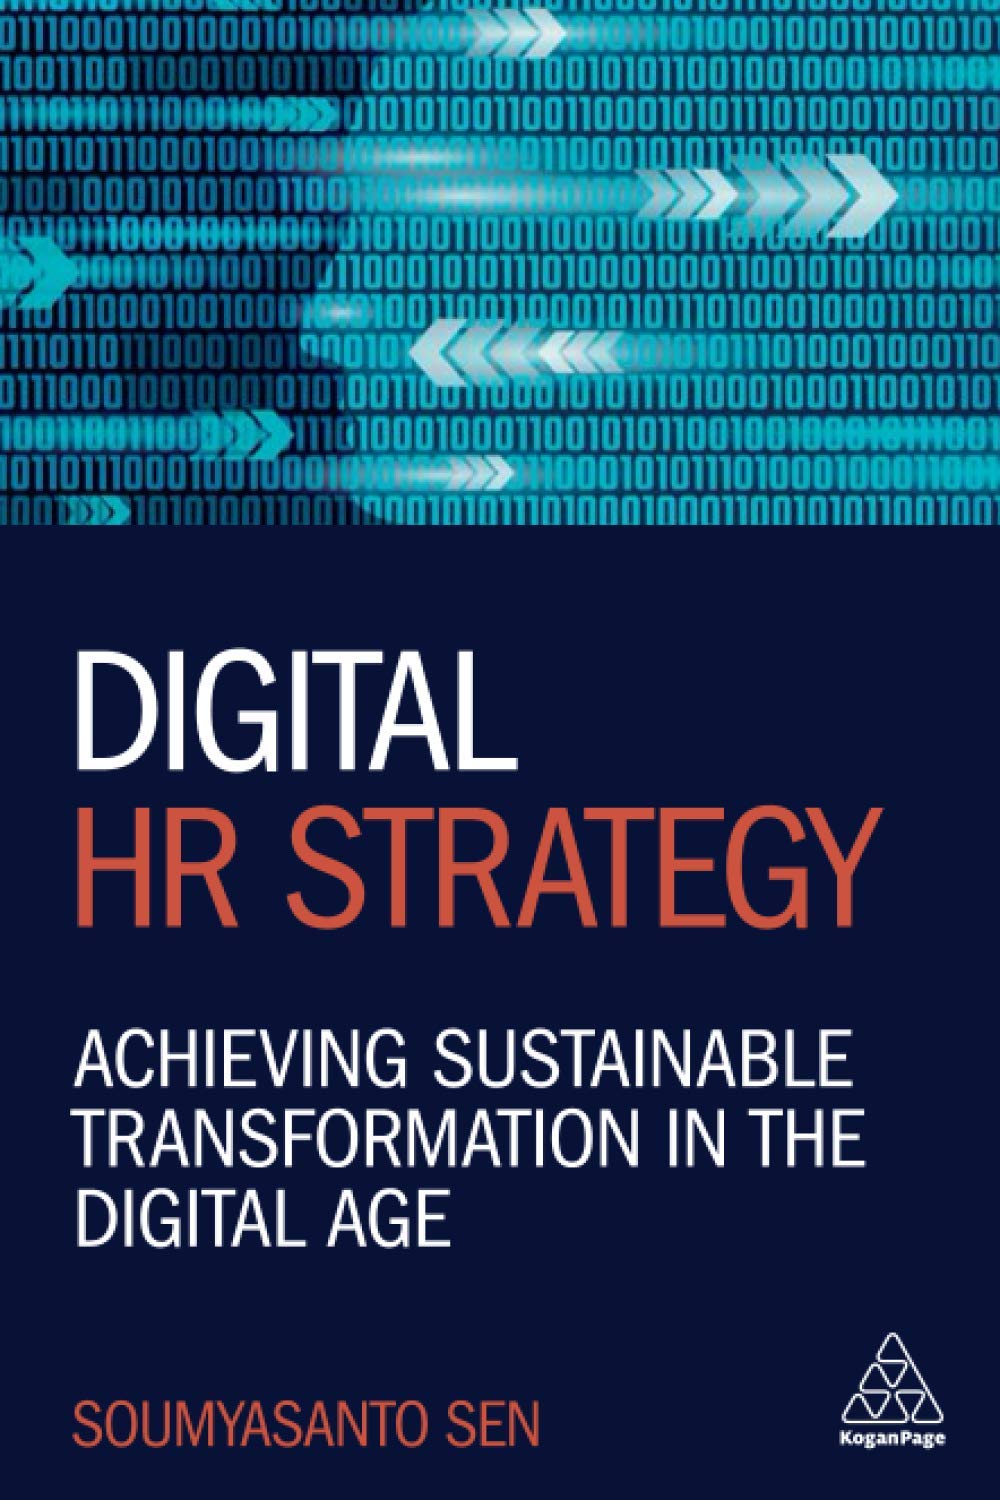 Couverture du livre "Digital HR Strategy: Achieving Sustainable Transformation in the Digital Age"